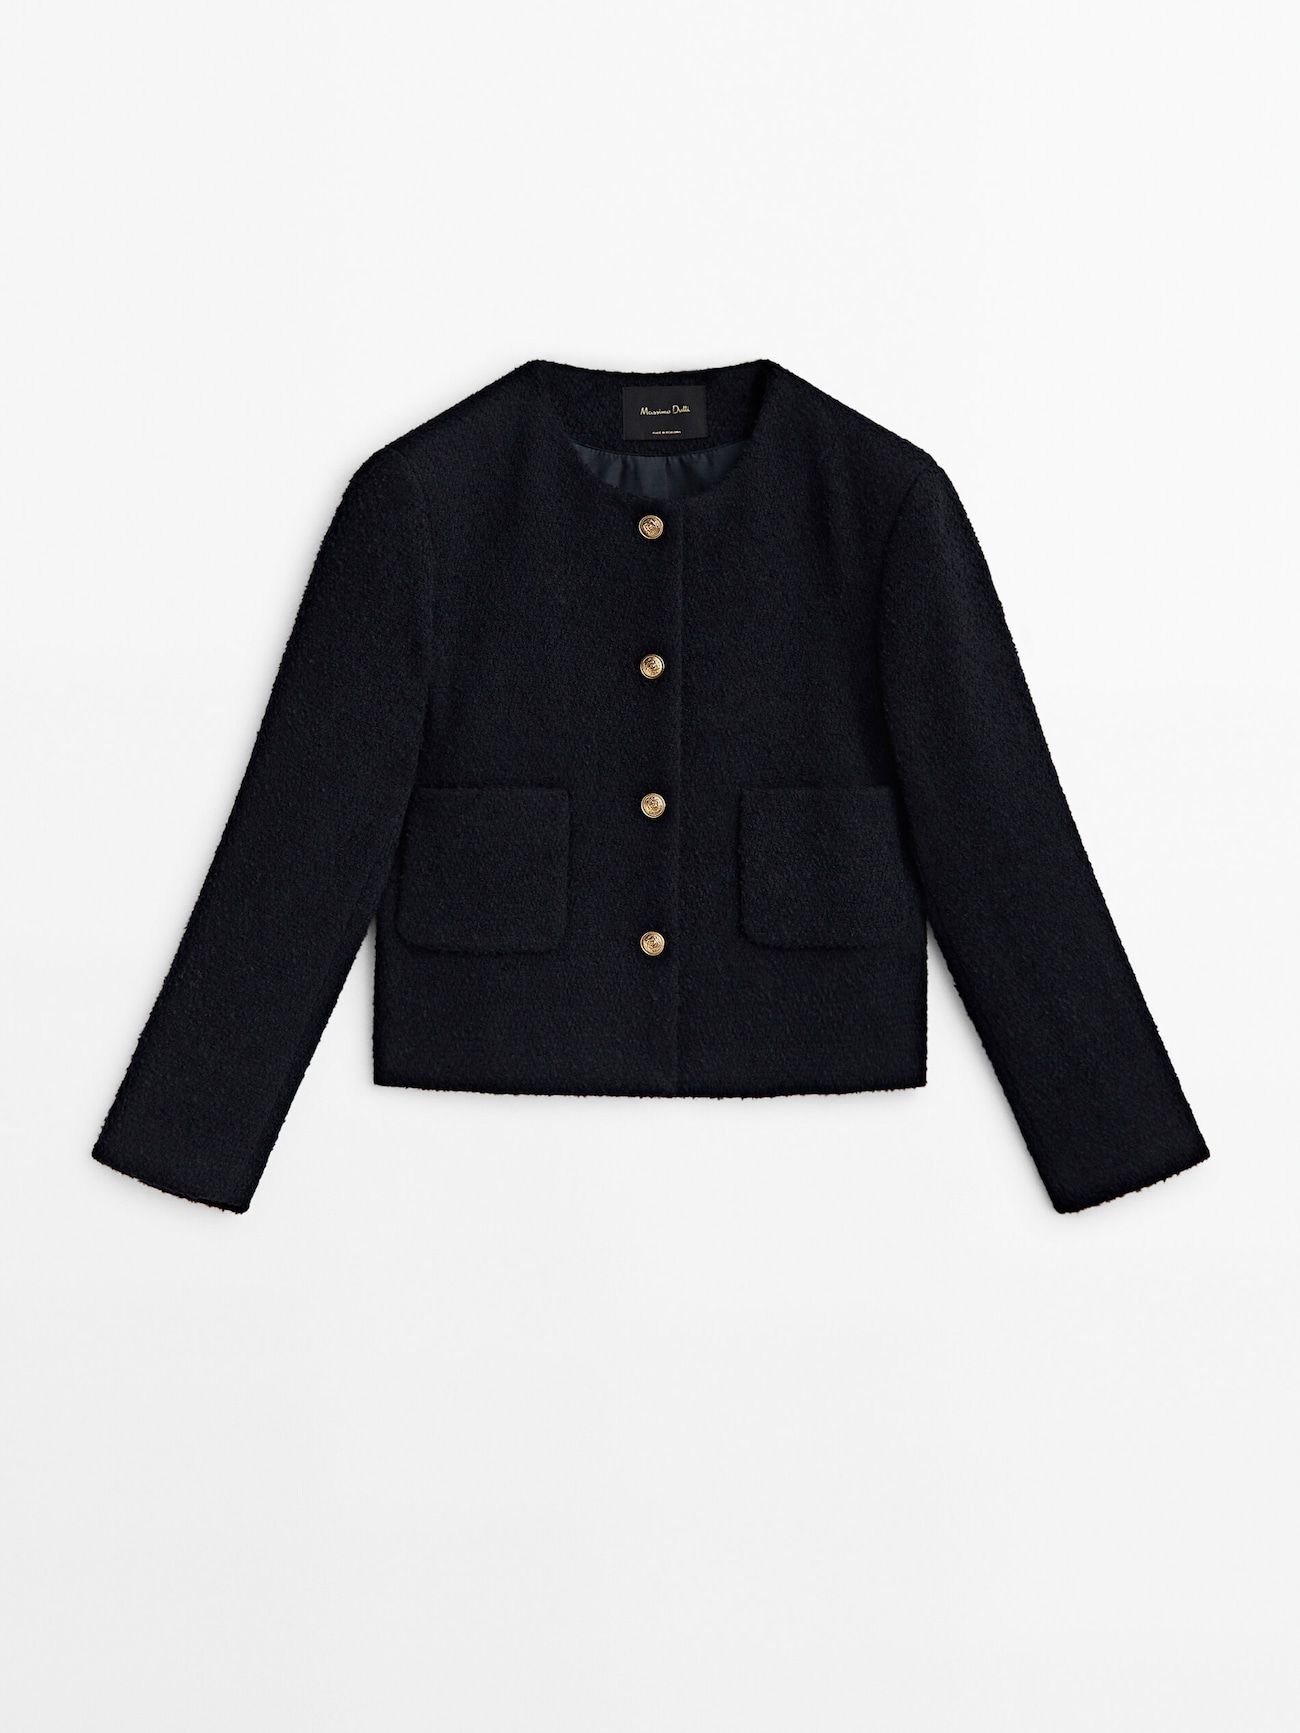 Textured coat with gold buttons | Massimo Dutti (US)